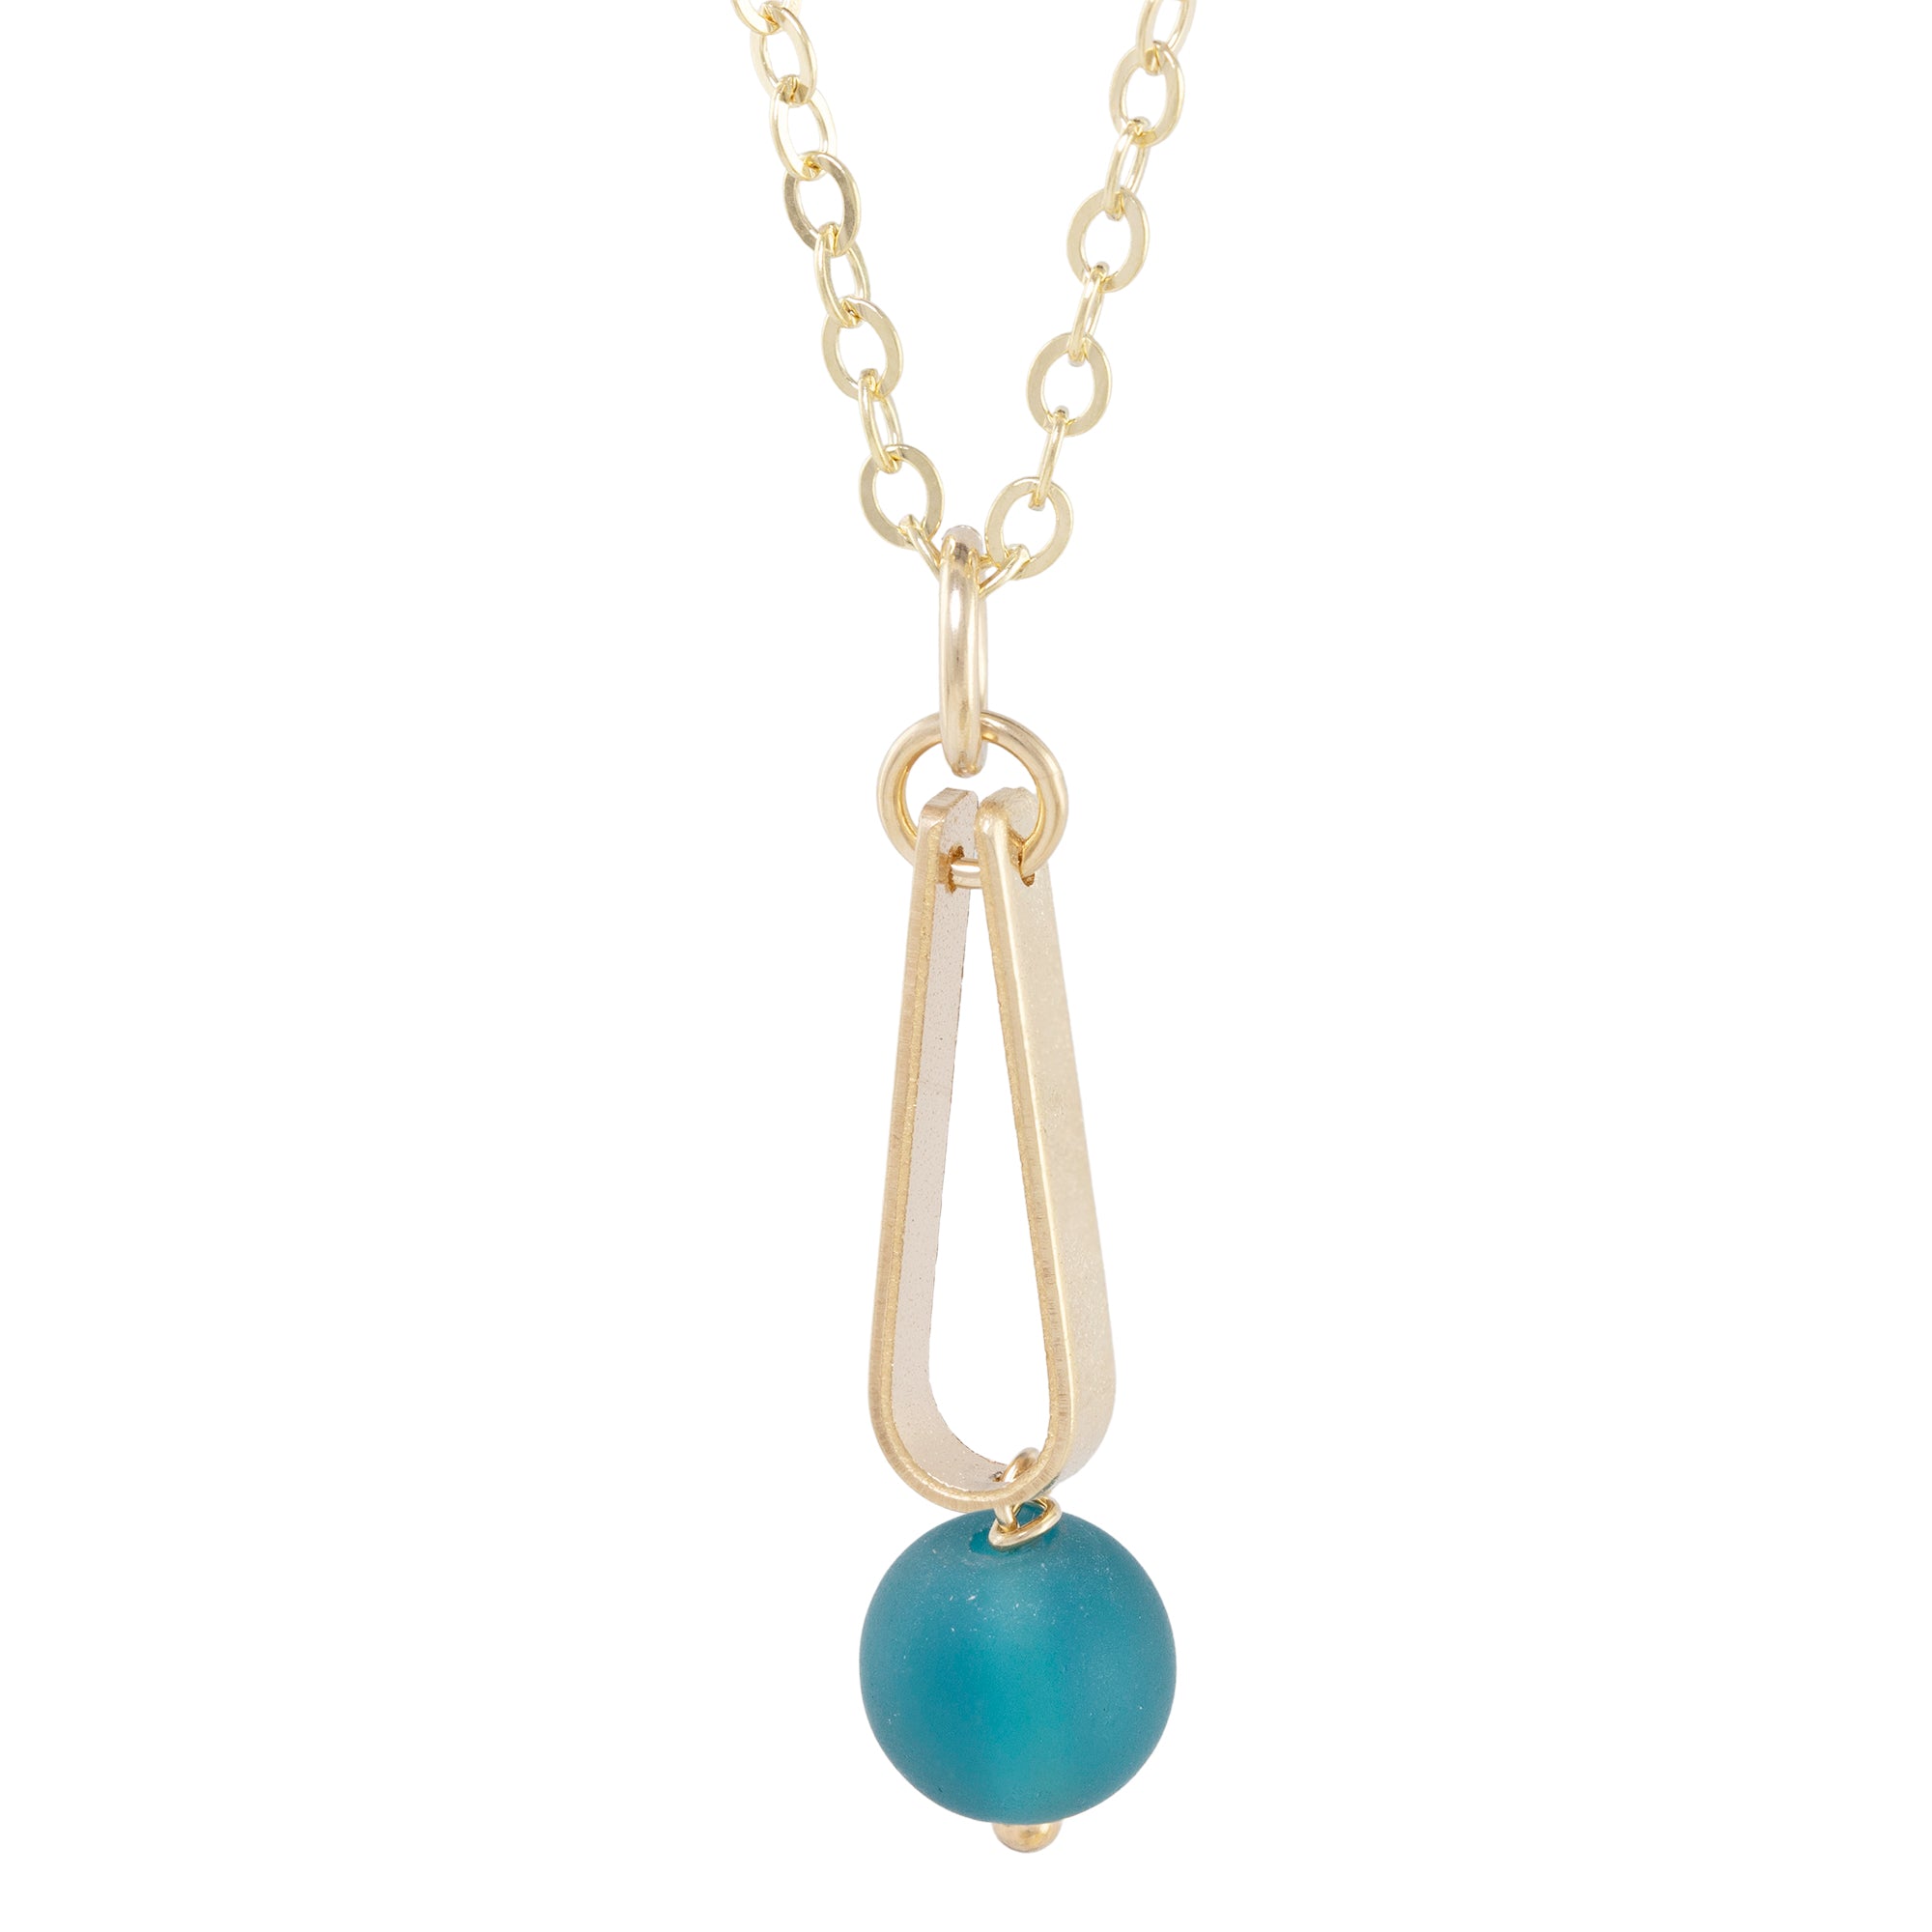 Teal Peacock Blue Round Recycled Glass Ball and 14K Gold Fill Teardrop Shaped Pendant Necklace